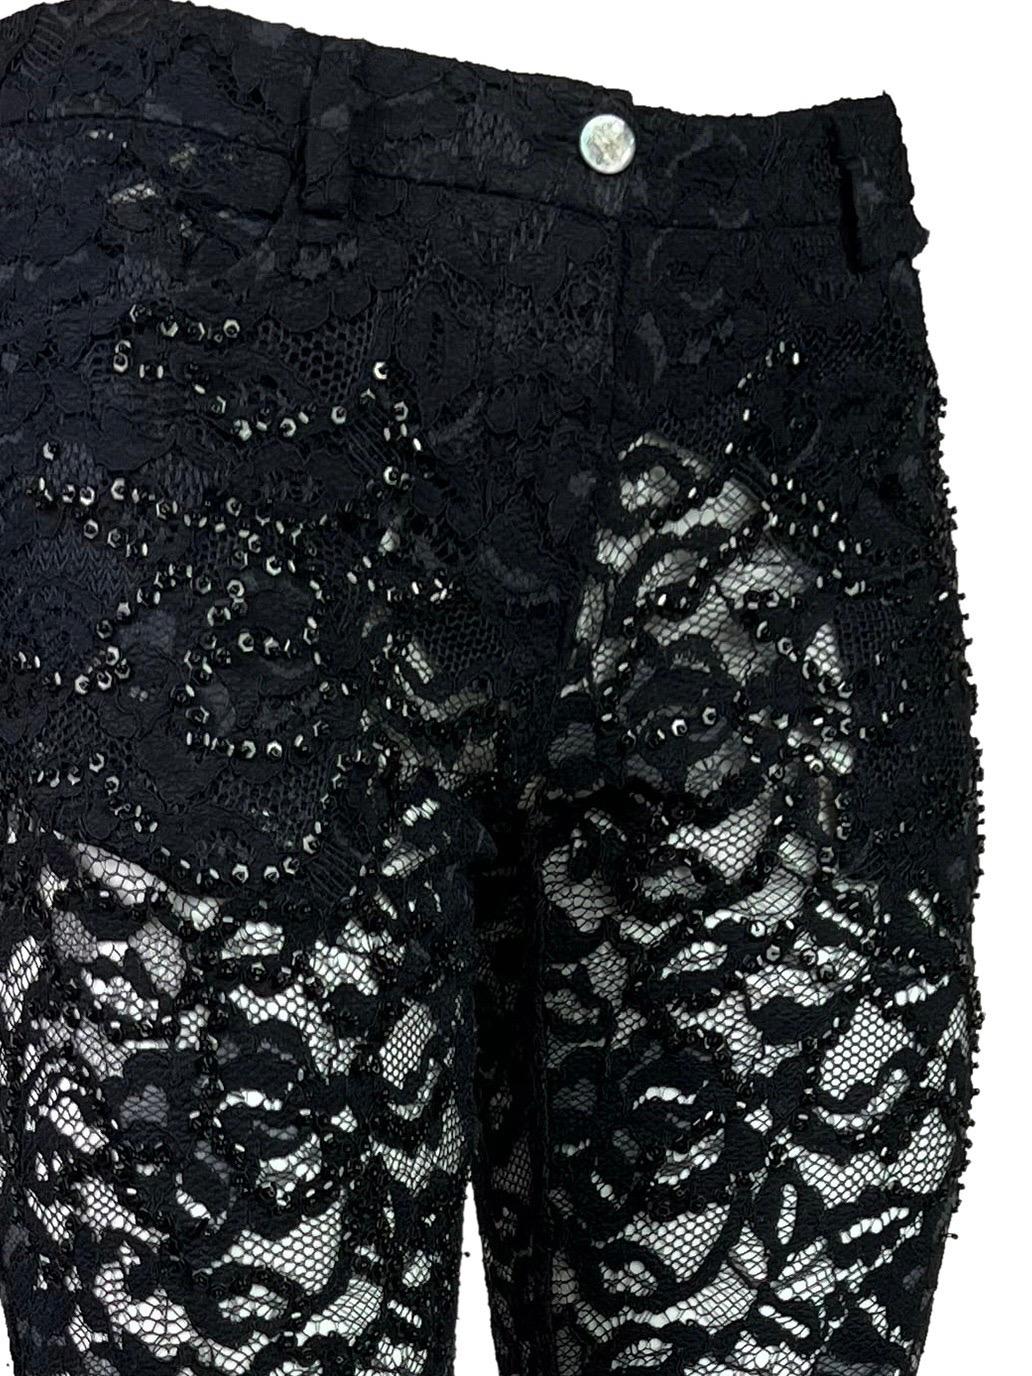 SS 1999 Alexander McQueen Lace Trousers 1